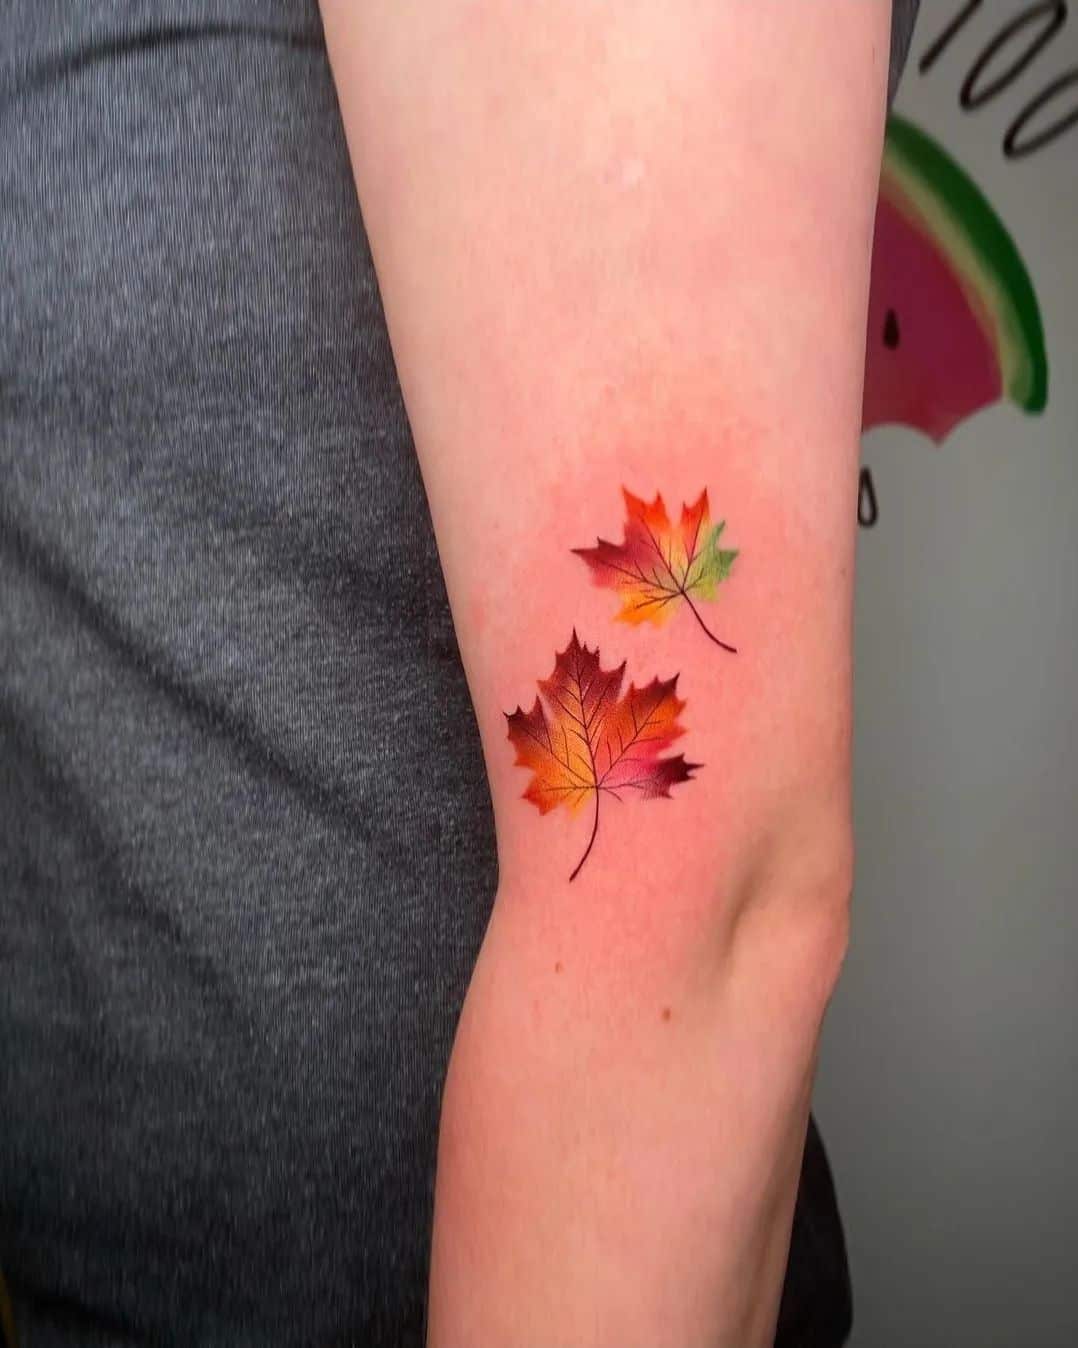 Amazoncom  Supperb Flower  Autumn Leaves Temporary Tattoos Gorgeous  Color Tattoos Fall In Love  Beauty  Personal Care